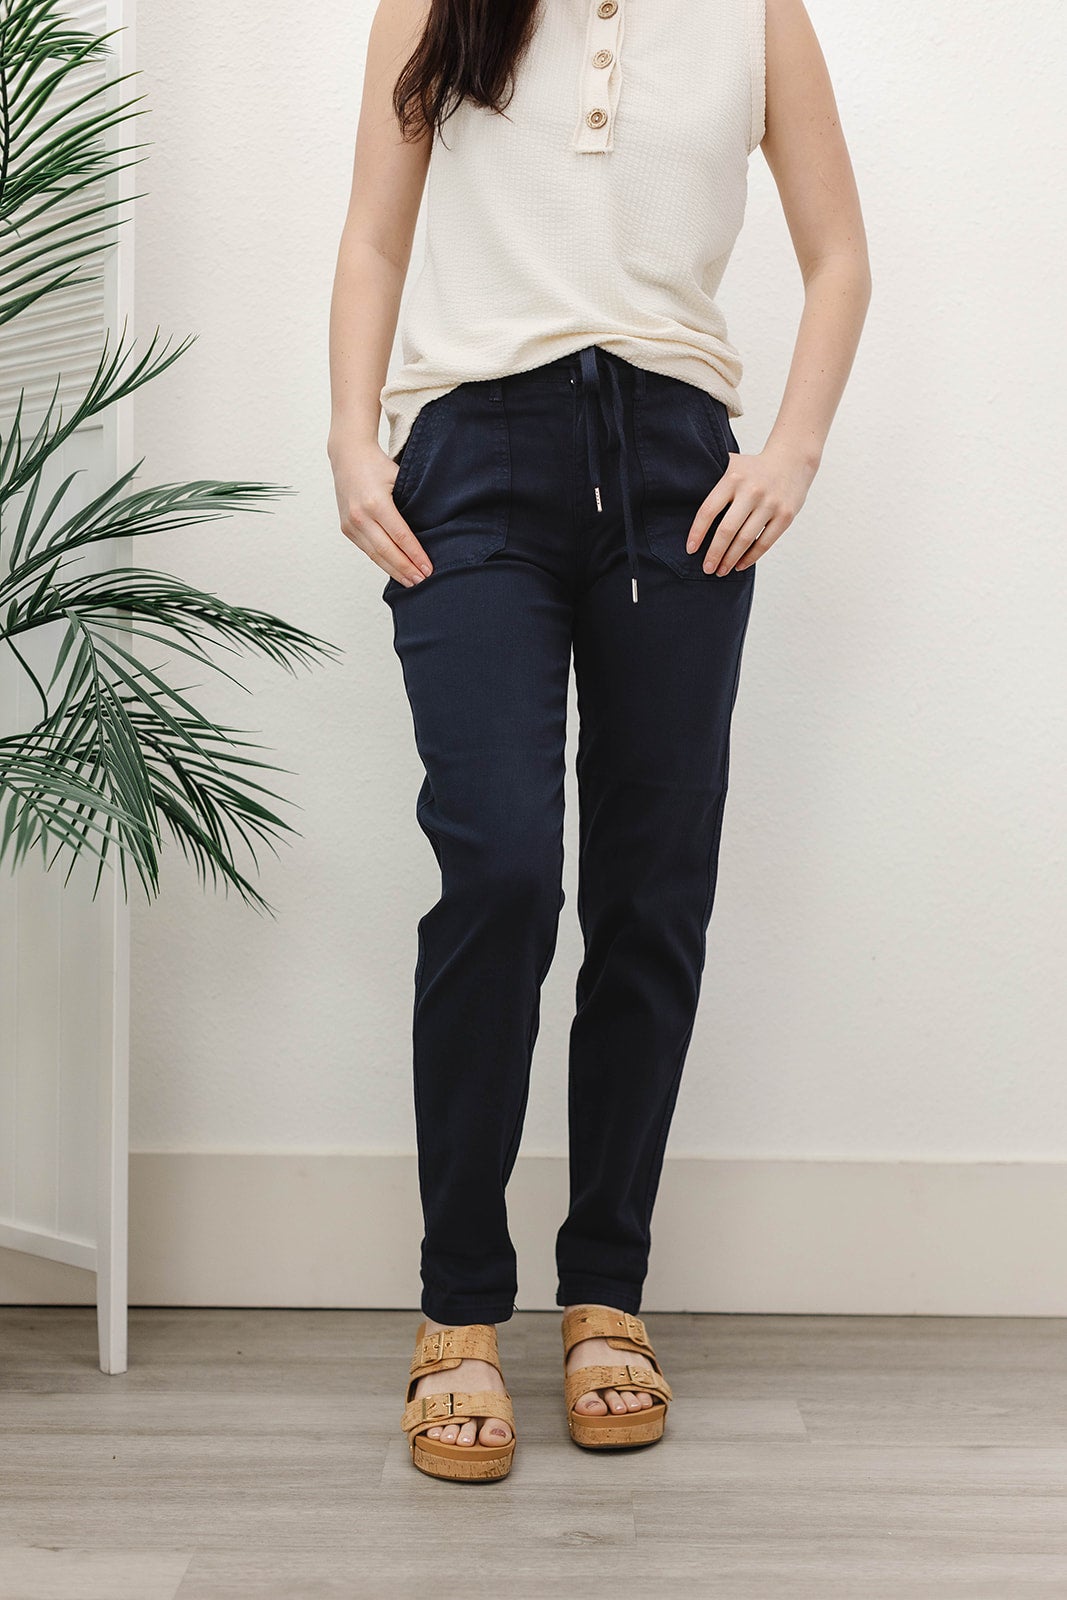 Navy Cuffed Joggers by Judy Blue